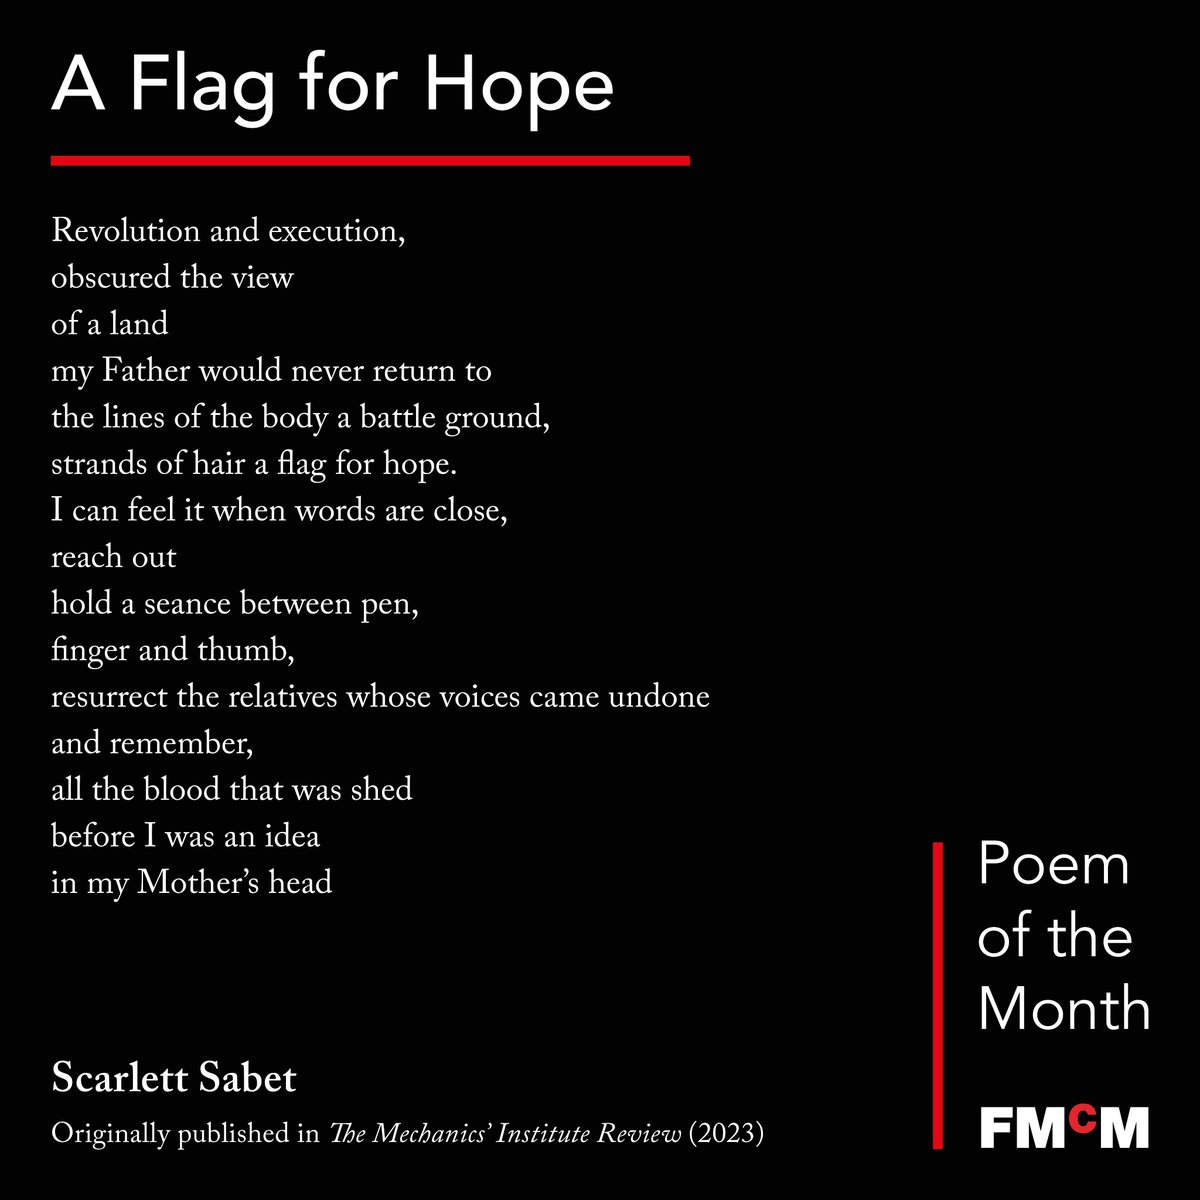 We’re delighted to share the second poem in our new monthly series! ✨ 'A Flag for Hope' by @ScarlettSabet was originally published in @mironlinebbk, alongside an inspiring interview on Scarlett's approach to writing. Read the full piece here: mironline.org/poem-interview…